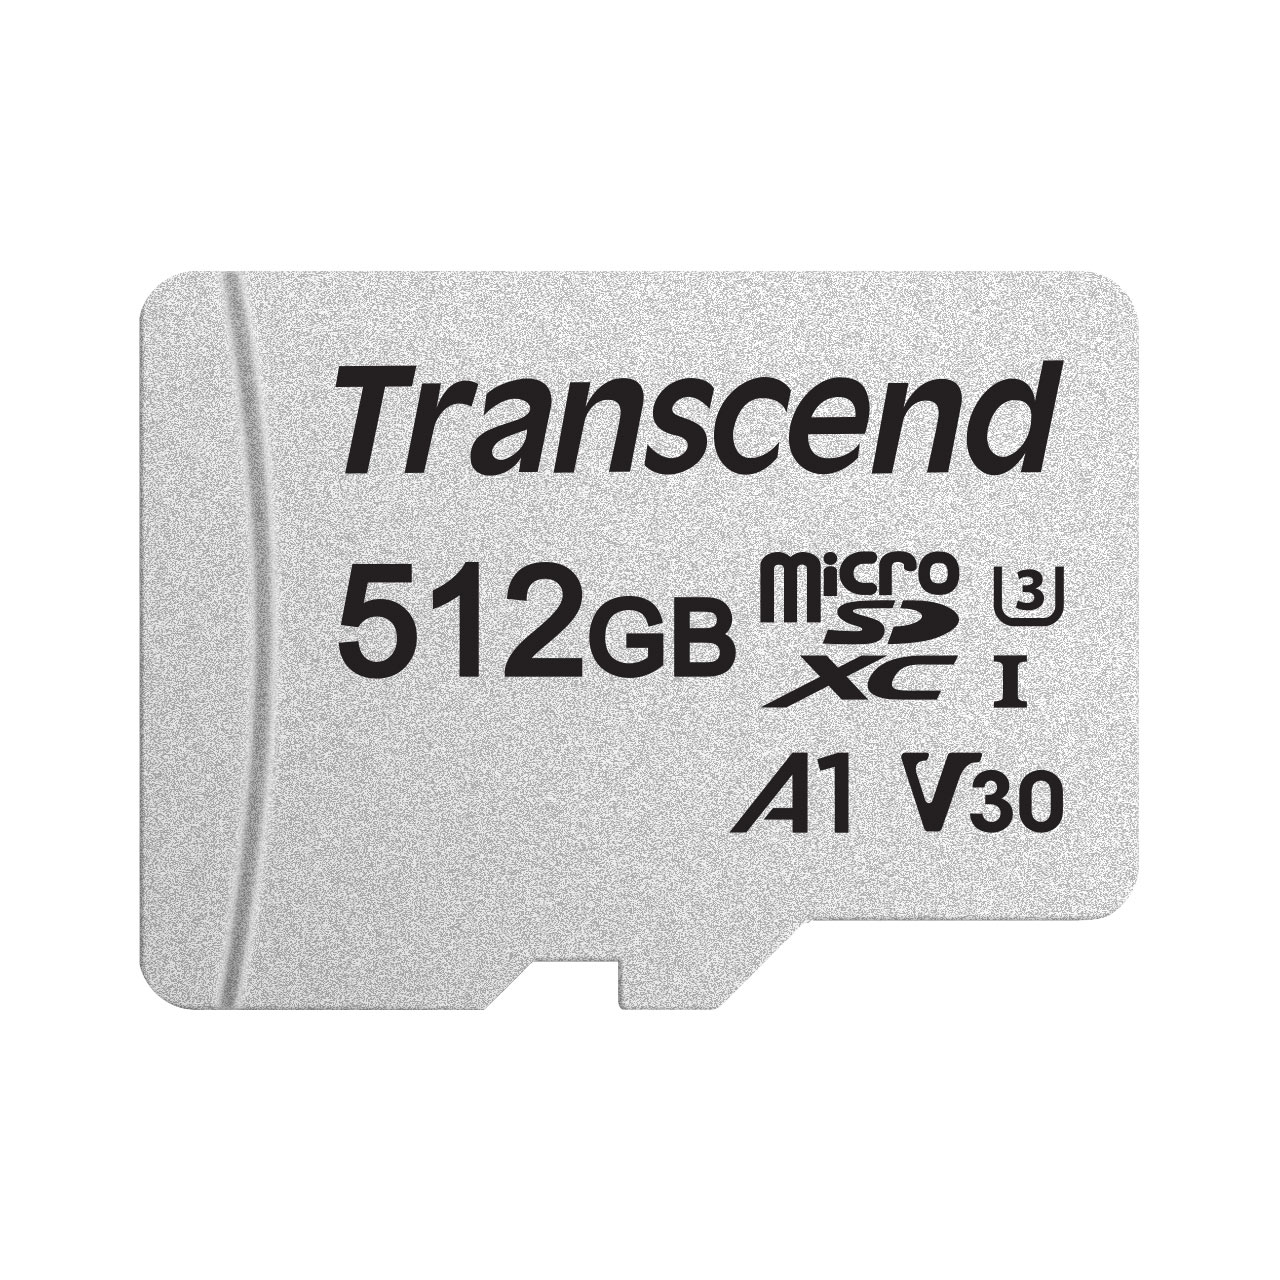 microSDXCJ[h 512GB Class10 UHS-I U3 U1 V30 A1 SDϊA_v^t Nintendo Switch ROG Ally Ή Transcend TS512GUSD300S-A